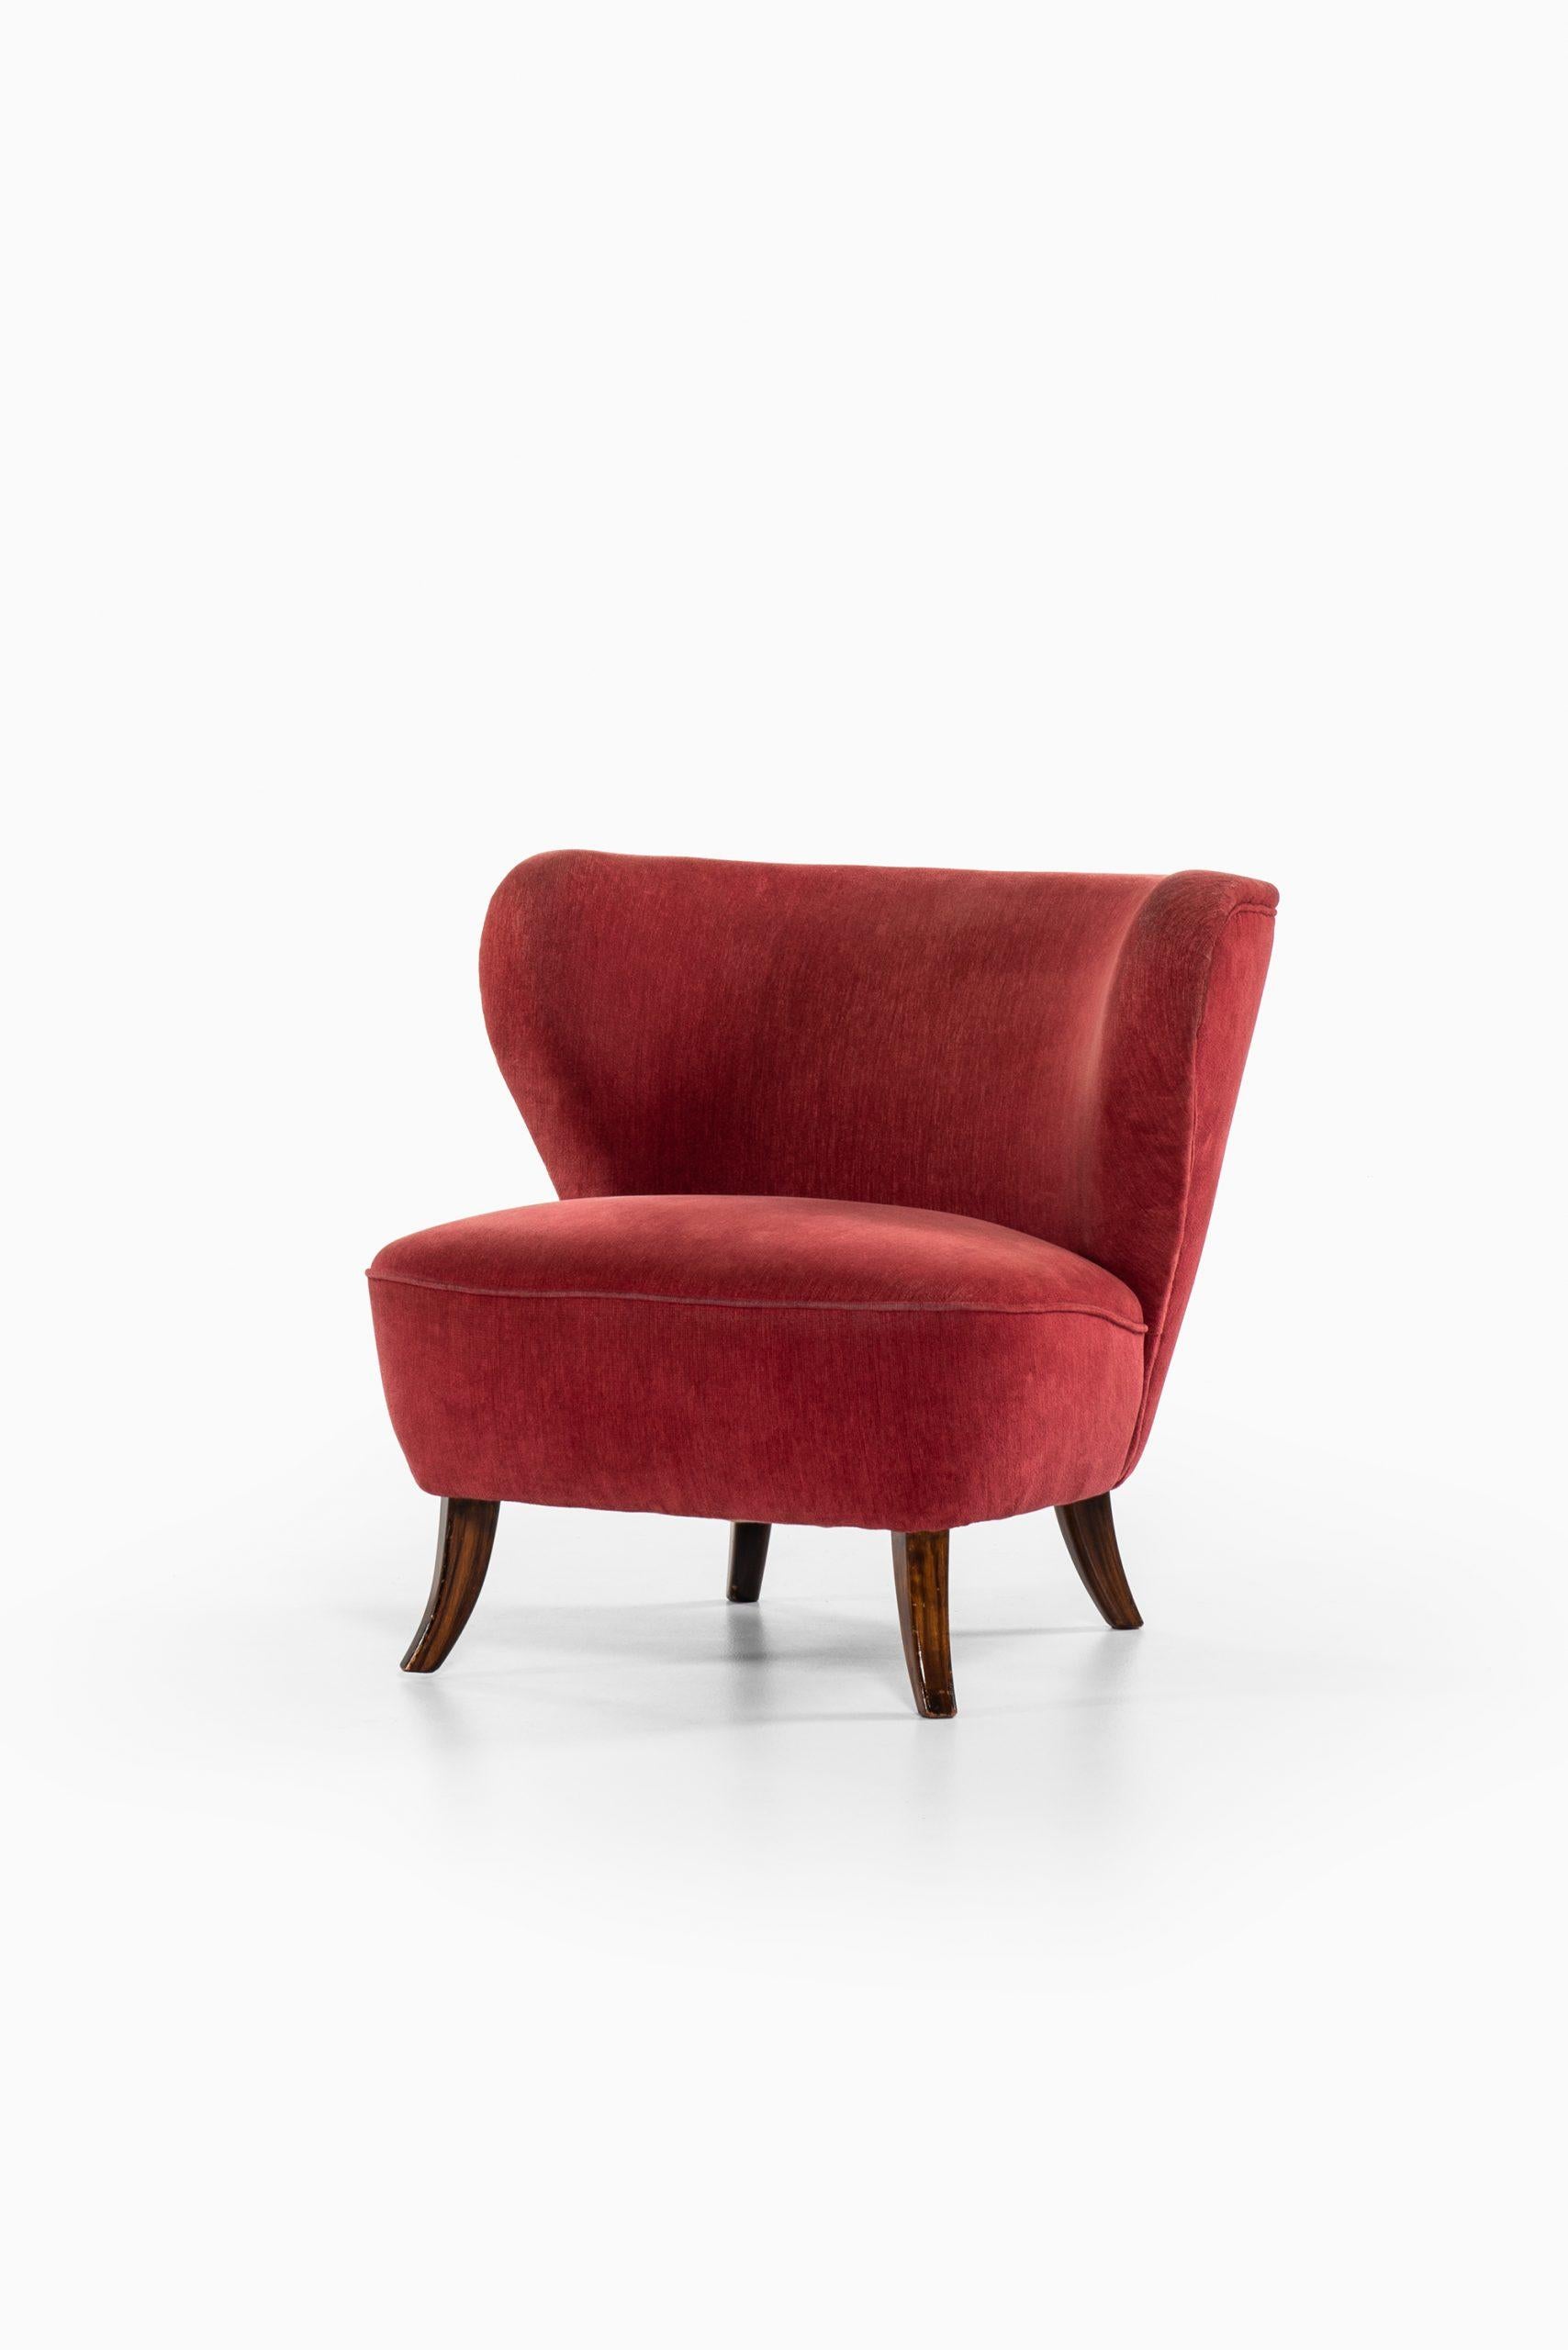 Mid-20th Century Easy Chair Probably Produced in Denmark For Sale